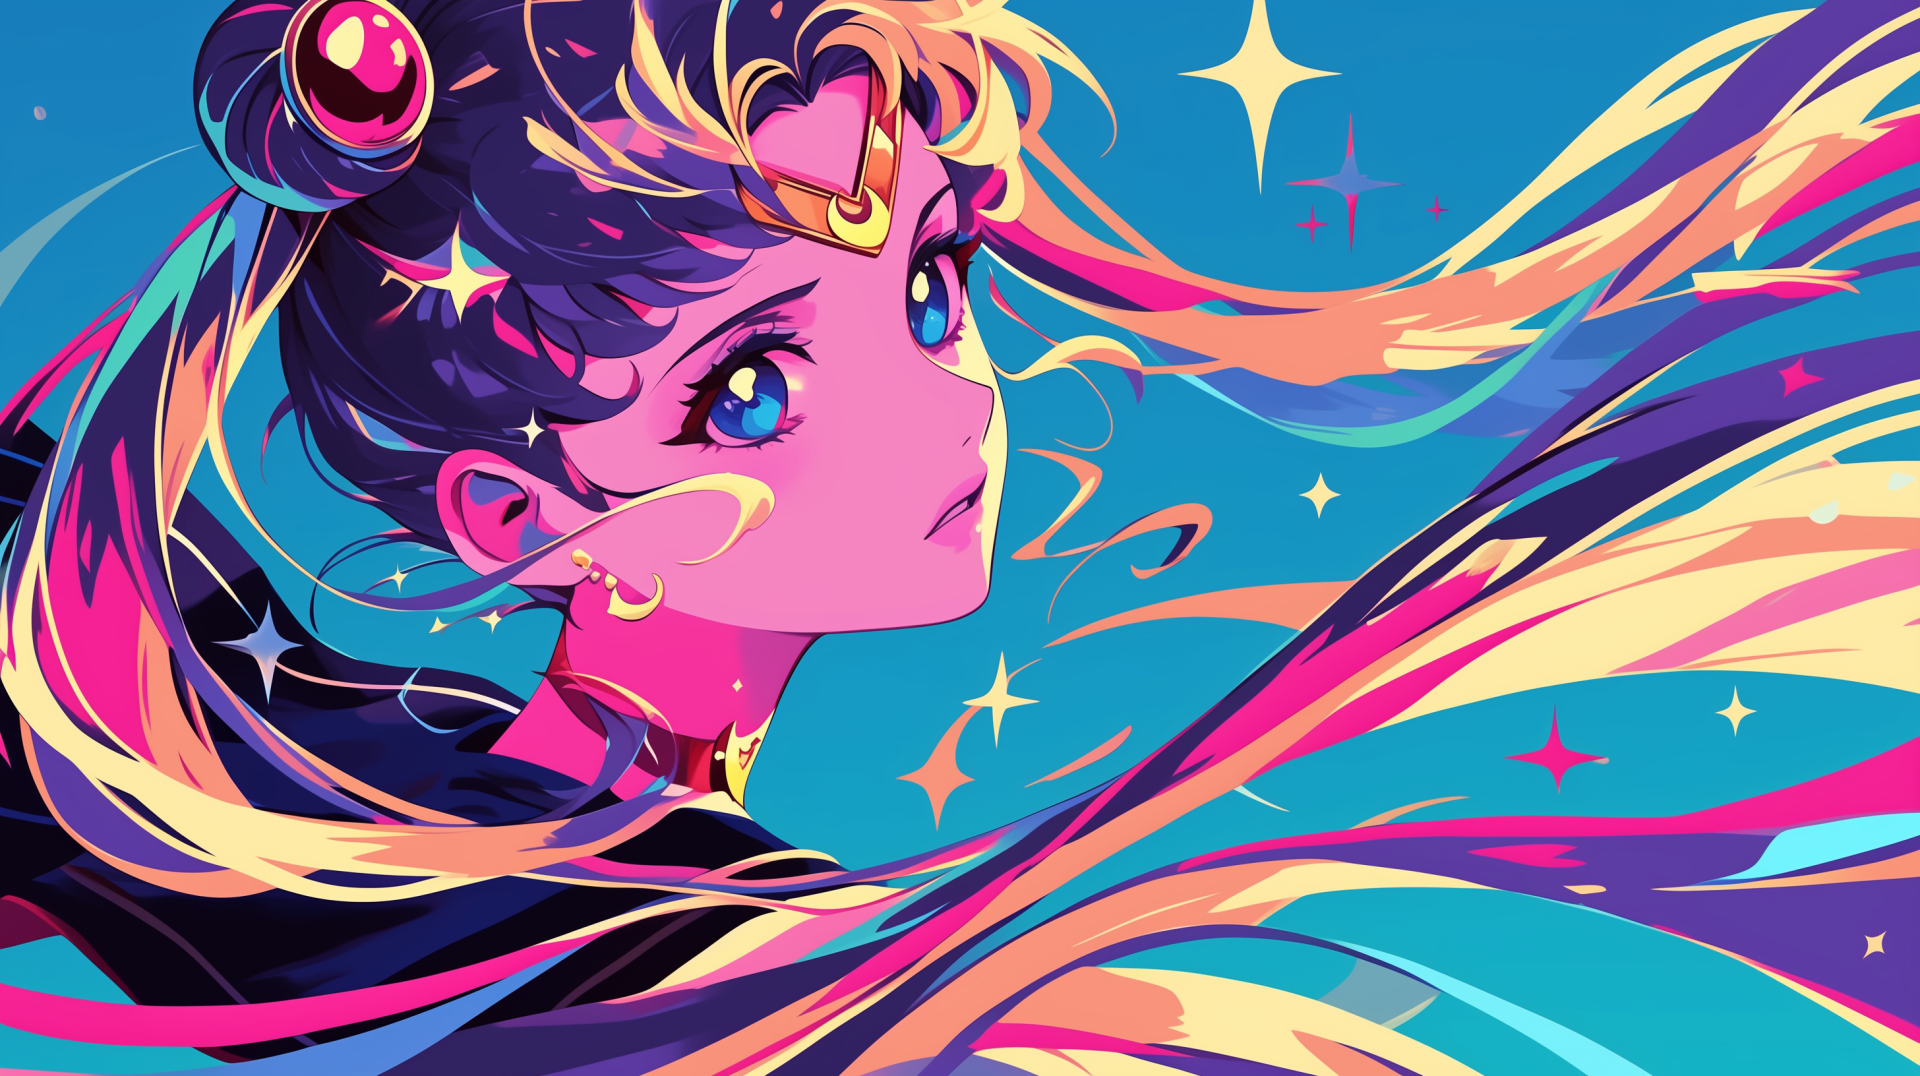 HD desktop wallpaper featuring Usagi Tsukino from Sailor Moon in a vibrant, colorful anime style.